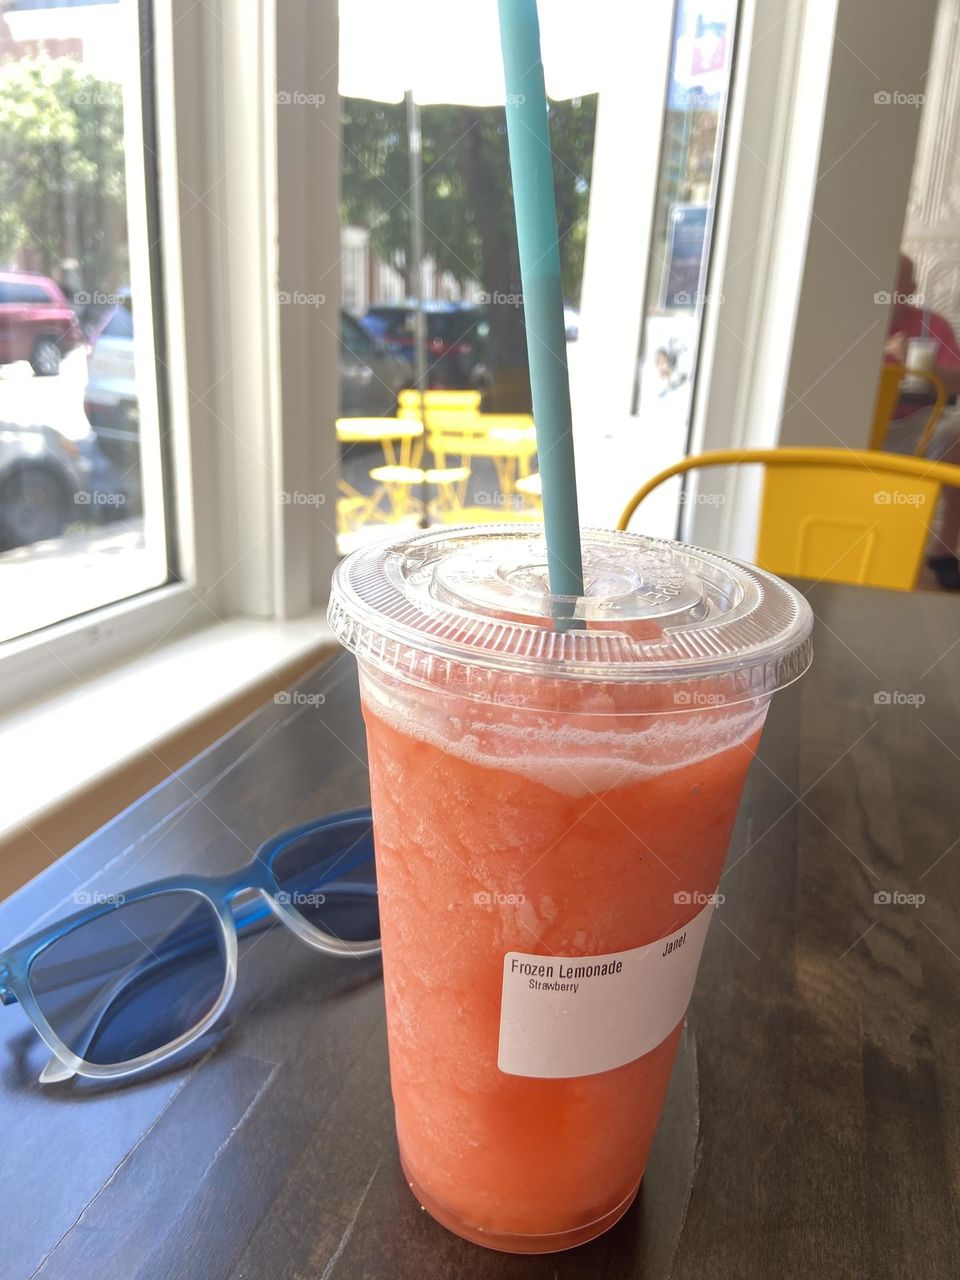 A frozen lemonade infused with strawberry. It’s an icy sweet/tart treat on a warm day. 